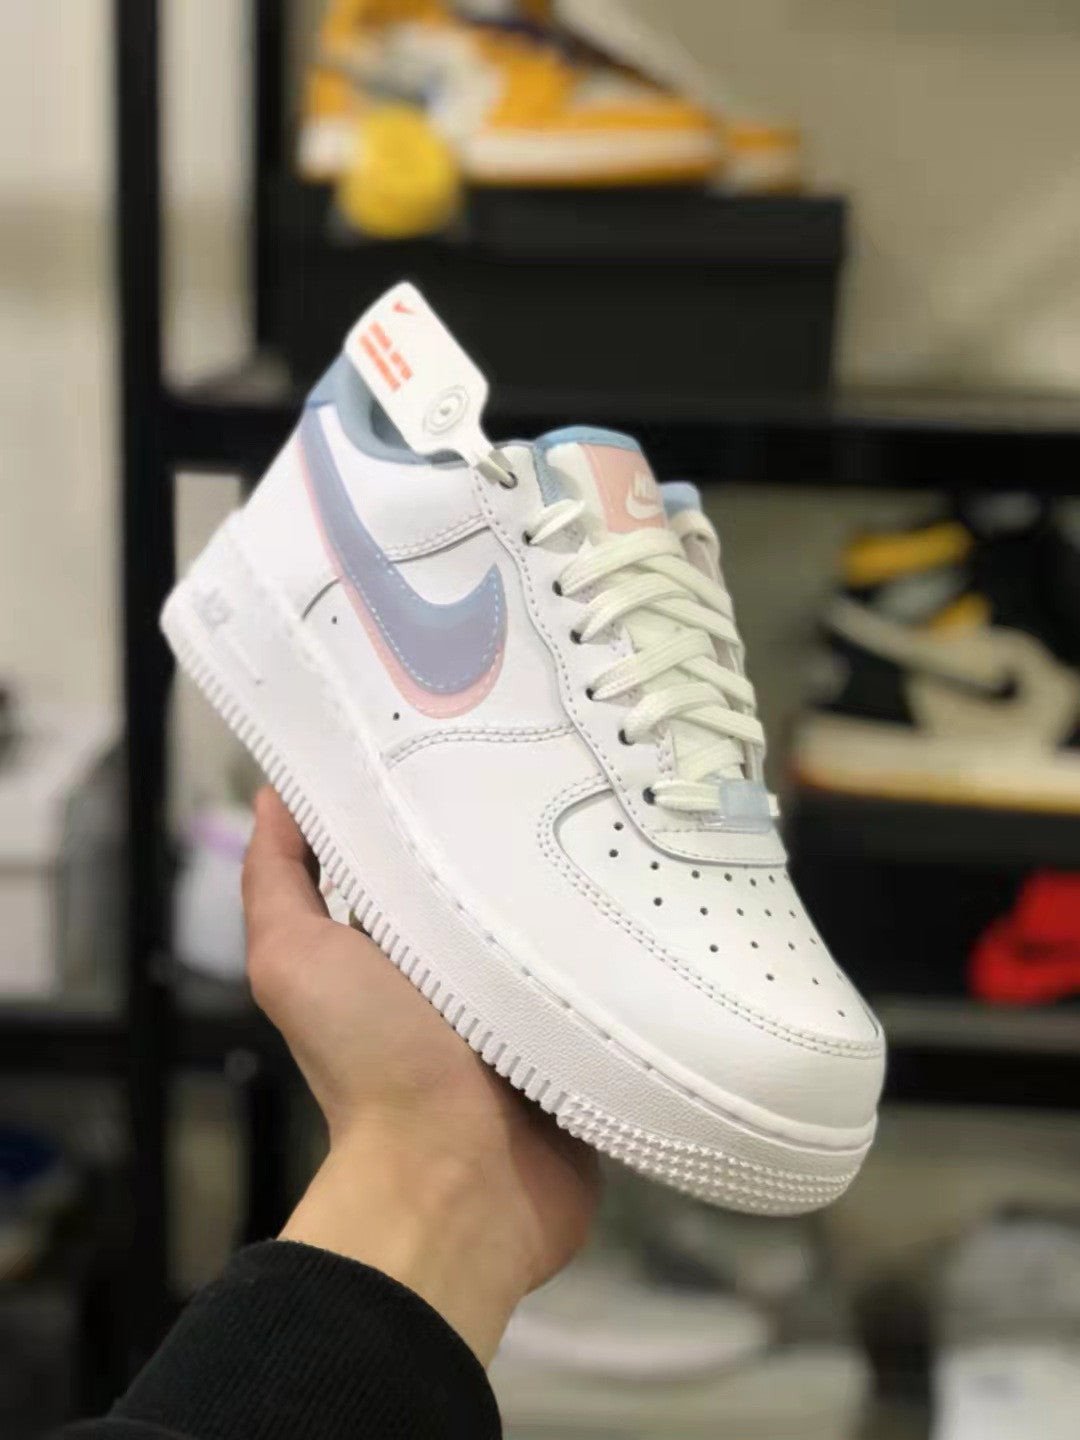 apuntalar Tender paso Nike Air Force 1 LV8 GS 'Double Swoosh' Shoes Sneakers - Praise To Heaven